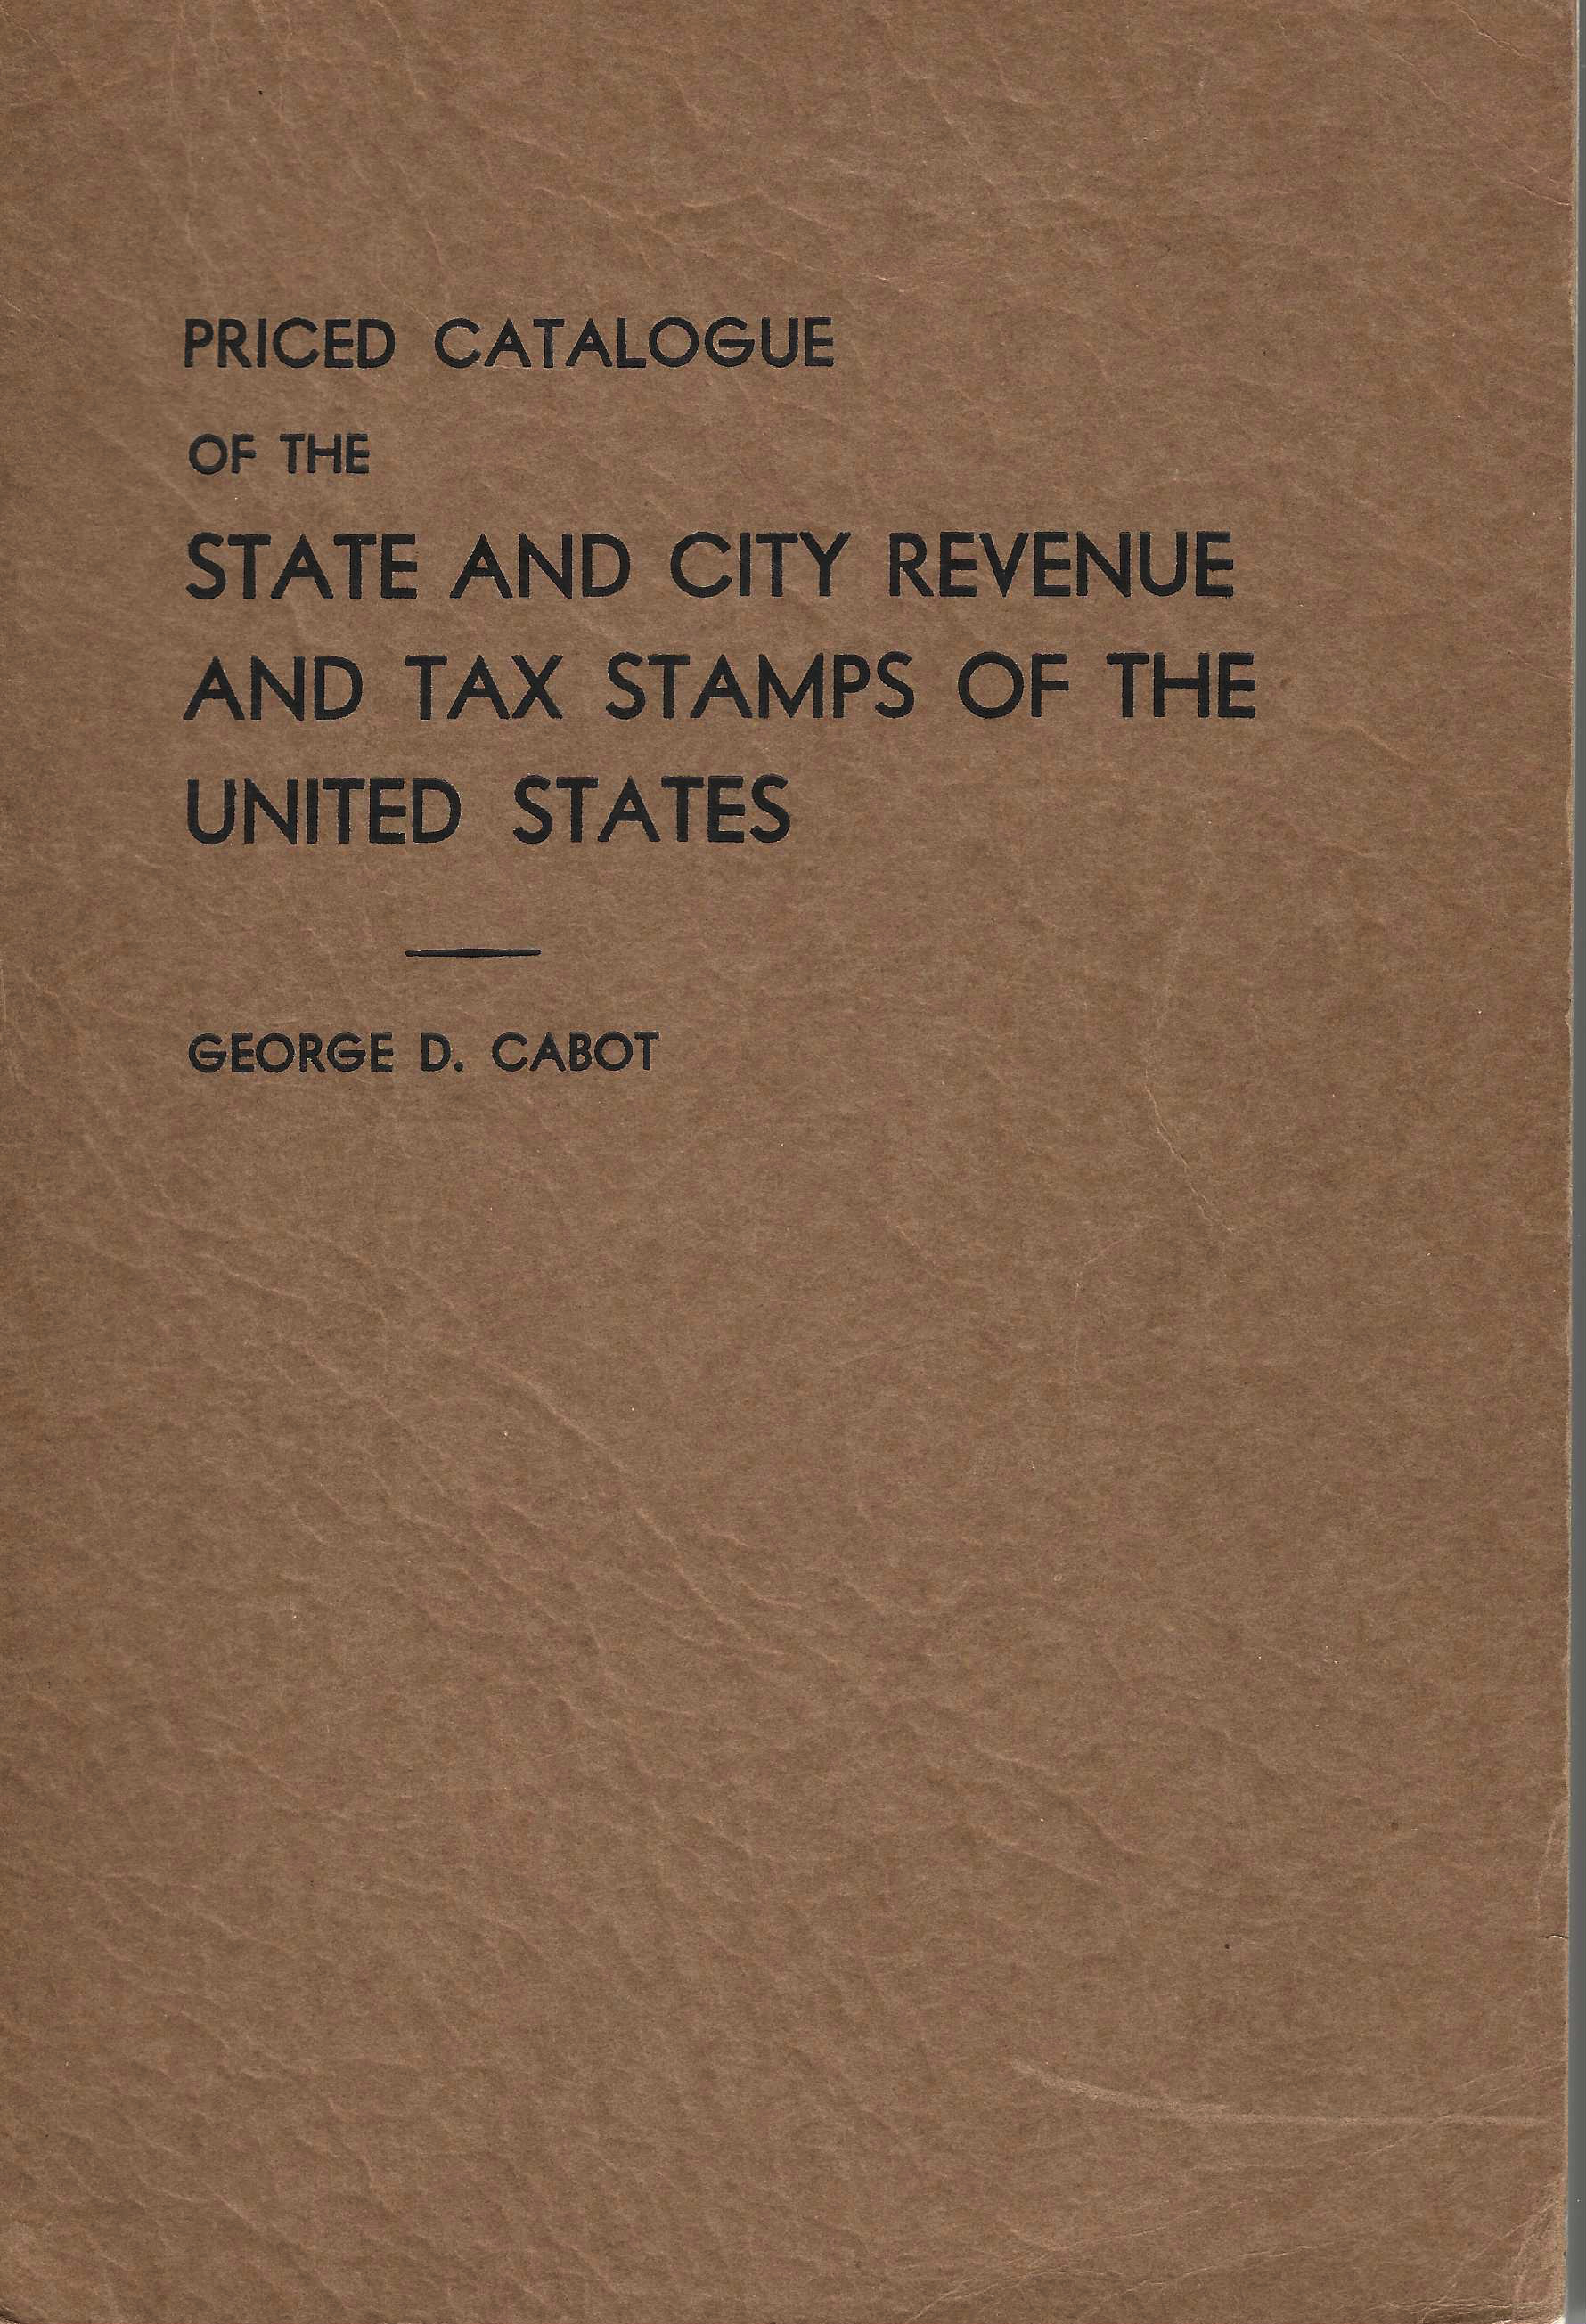 CATALOG - State And City Tax Stamps Of The United States, 1940 by George D. Cabot,